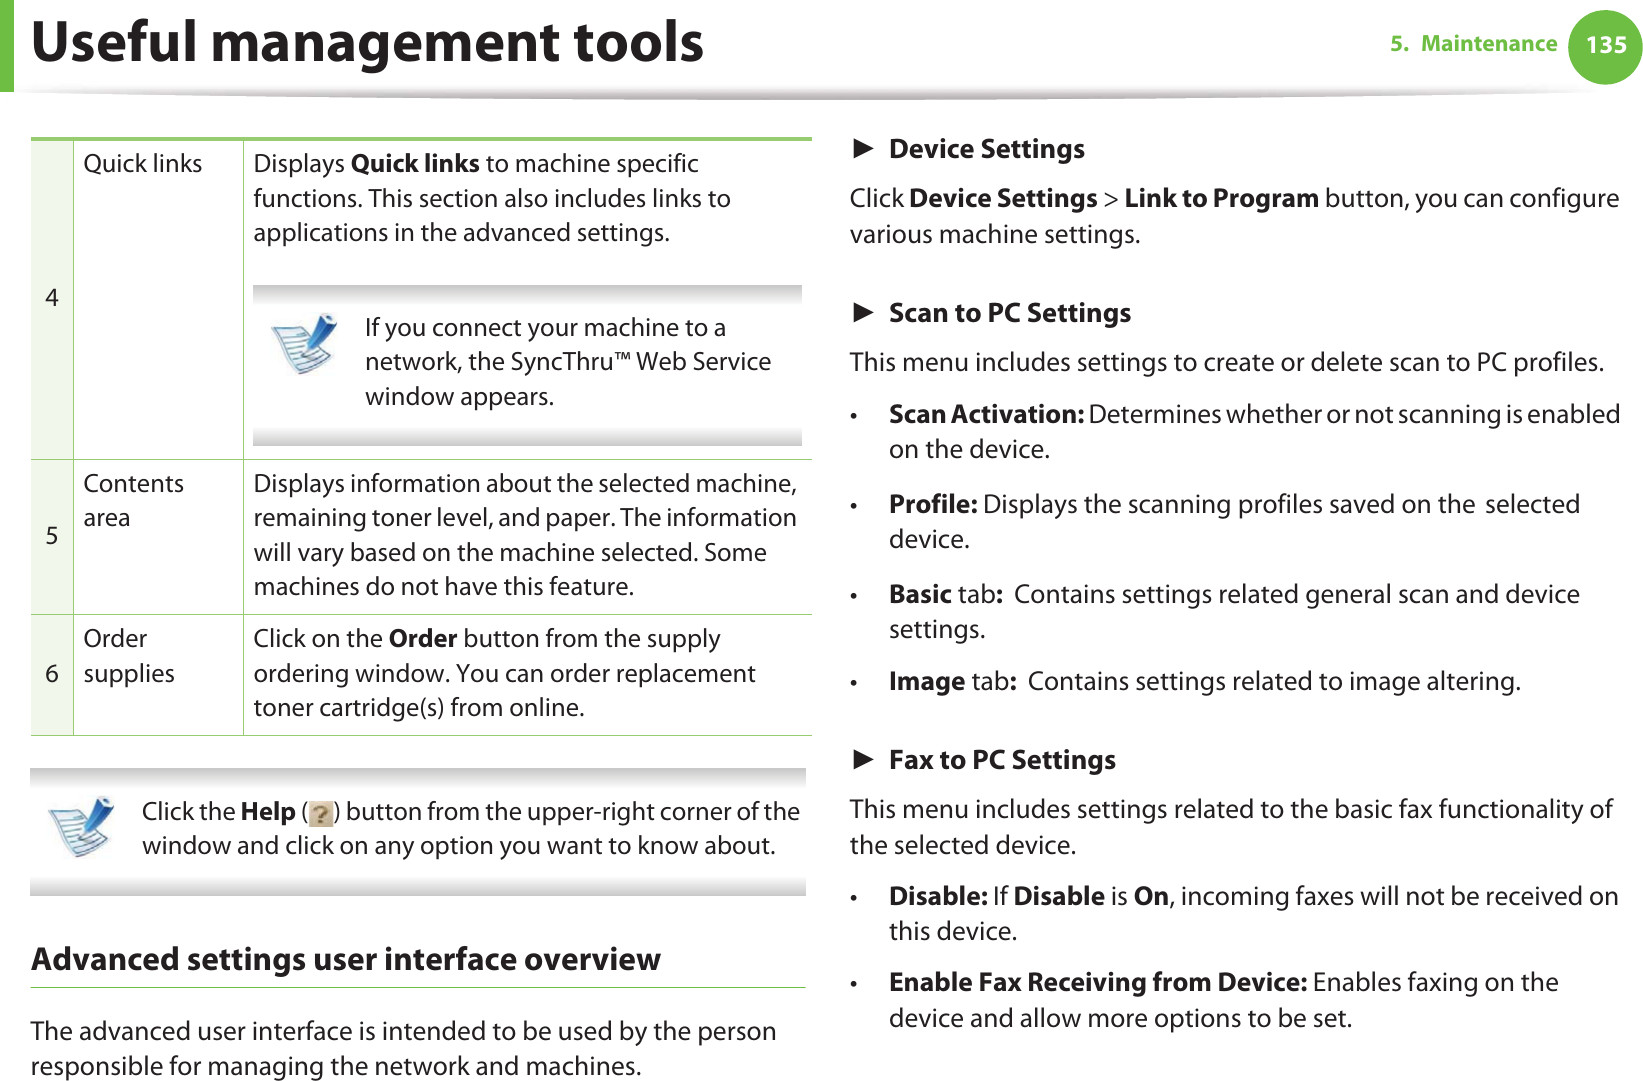 Useful management tools 1355. Maintenance Click the Help ( ) button from the upper-right corner of the window and click on any option you want to know about.  Advanced settings user interface overviewThe advanced user interface is intended to be used by the person responsible for managing the network and machines.ŹDevice SettingsClick Device Settings &gt; Link to Program button, you can configure various machine settings.ŹScan to PC SettingsThis menu includes settings to create or delete scan to PC profiles. •Scan Activation: Determines whether or not scanning is enabled on the device.•Profile: Displays the scanning profiles saved on theGselected device.•Basic tab:  Contains settings related general scan and deviceGsettings.•Image tab:  Contains settings related to image altering.ŹFax to PC SettingsThis menu includes settings related to the basic fax functionality of the selected device. •Disable: If Disable is On, incoming faxes will not be received on this device.•Enable Fax Receiving from Device: Enables faxing on the device and allow more options to be set.4Quick links Displays Quick links to machine specific functions. This section also includes links to applications in the advanced settings. If you connect your machine to a network, the SyncThru™ Web Service window appears. 5Contents areaDisplays information about the selected machine, remaining toner level, and paper. The information will vary based on the machine selected. Some machines do not have this feature.6Order suppliesClick on the Order button from the supply ordering window. You can order replacement toner cartridge(s) from online.